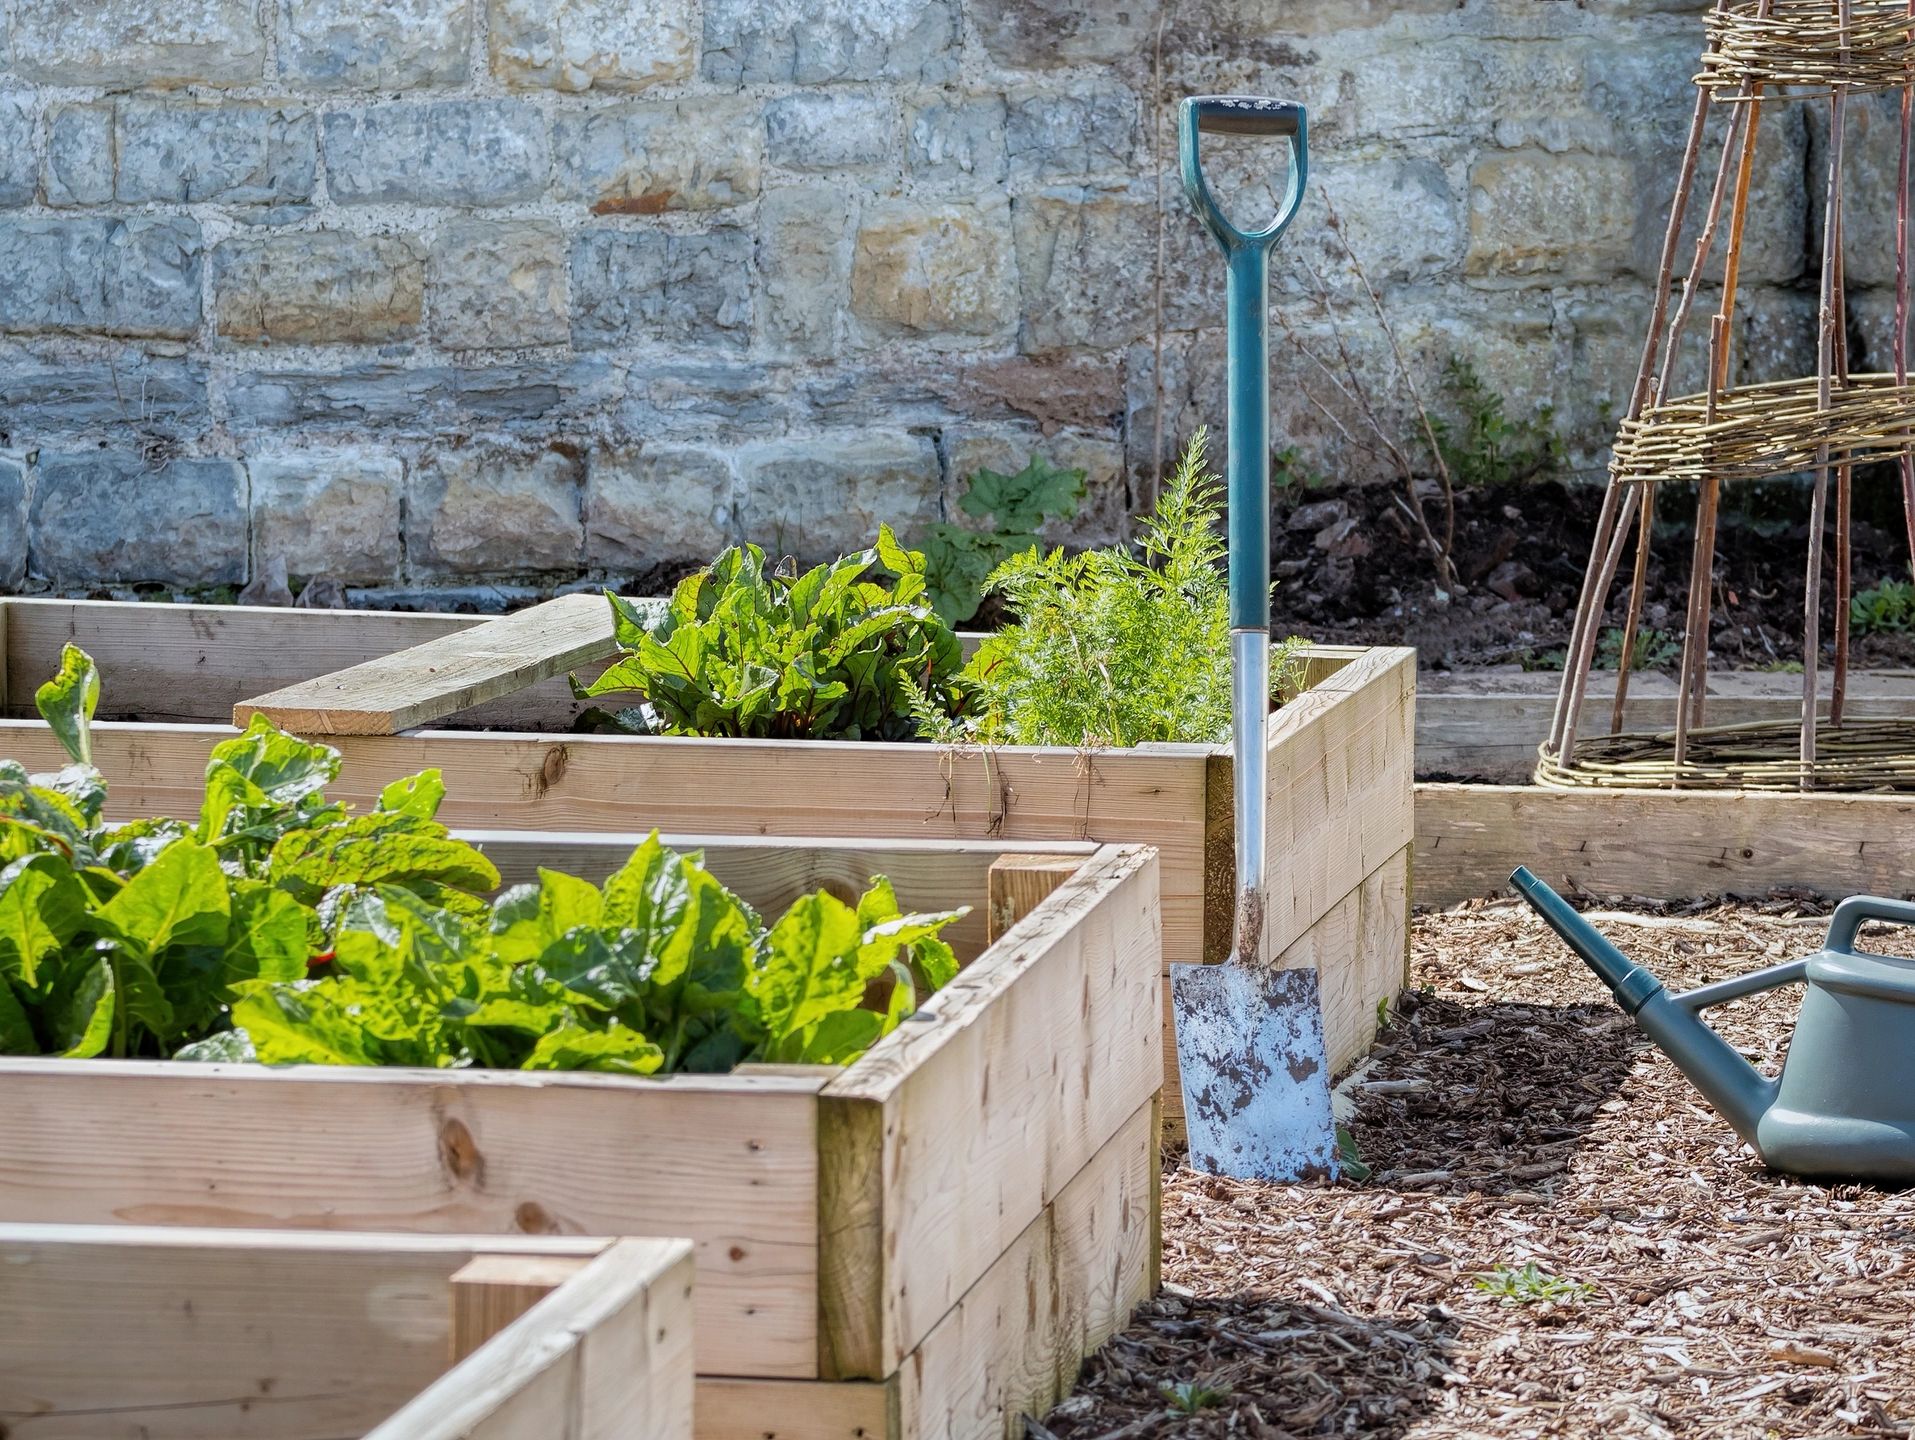 Raised garden beds with plants, a shovel, and a watering can